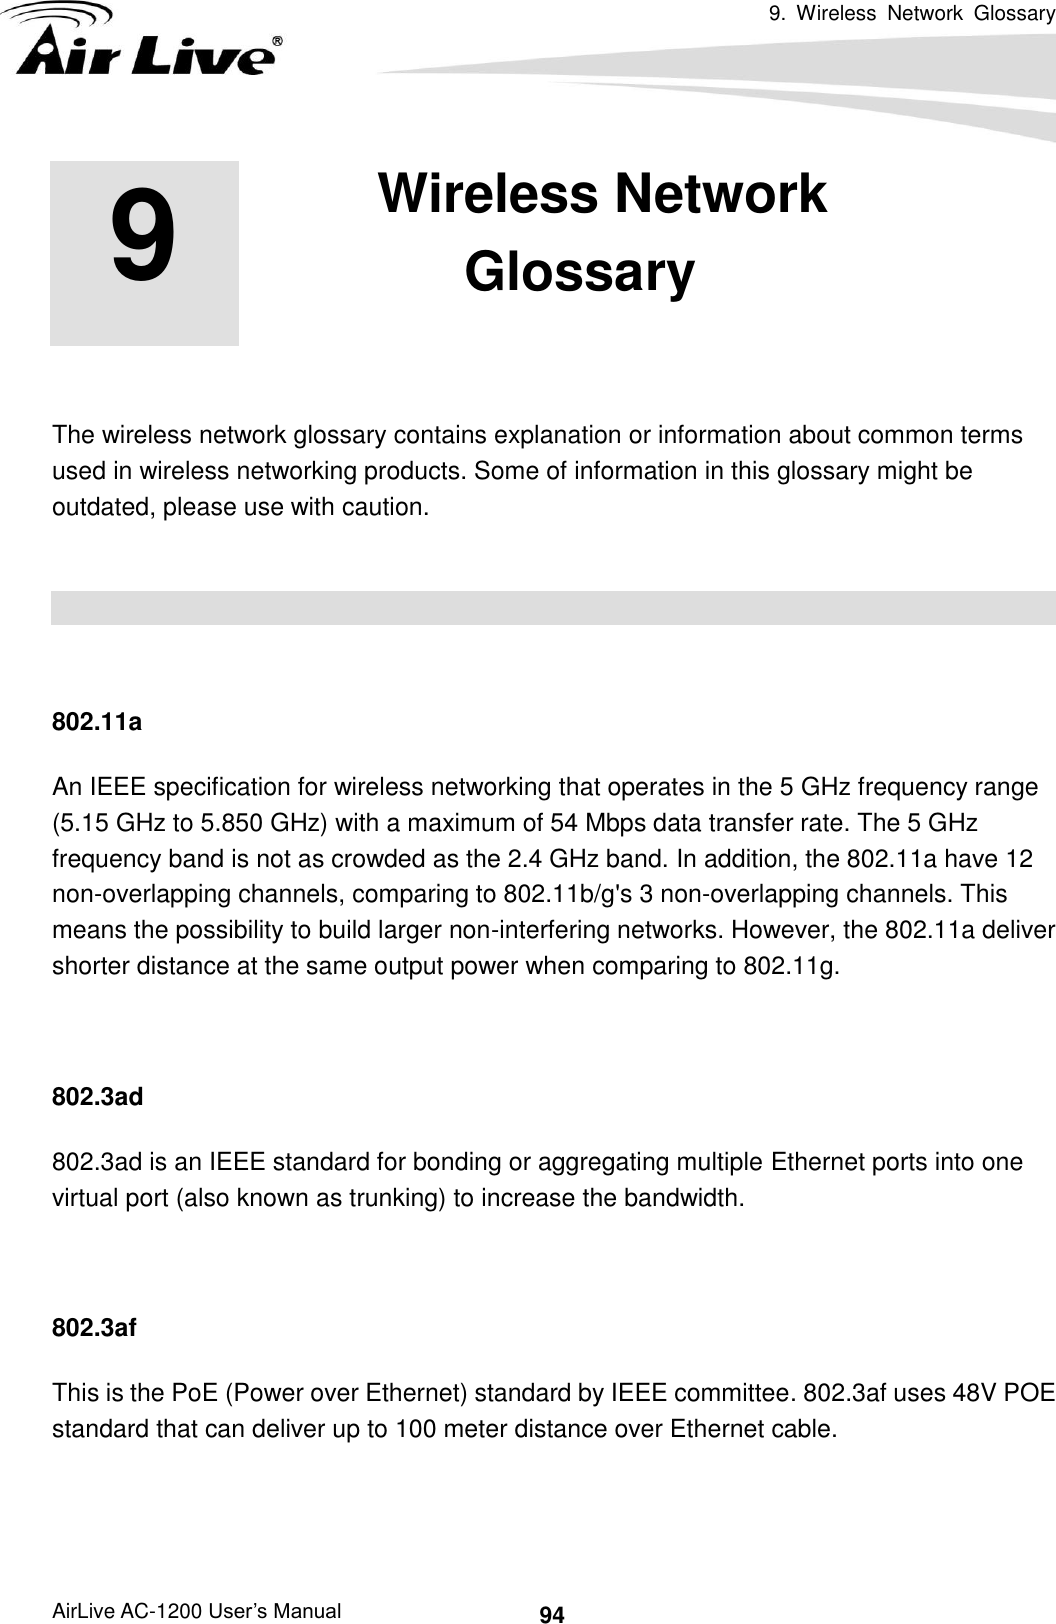 9.  Wireless  Network  Glossary      AirLive AC-1200 User’s Manual 94     The wireless network glossary contains explanation or information about common terms used in wireless networking products. Some of information in this glossary might be outdated, please use with caution.    802.11a An IEEE specification for wireless networking that operates in the 5 GHz frequency range (5.15 GHz to 5.850 GHz) with a maximum of 54 Mbps data transfer rate. The 5 GHz frequency band is not as crowded as the 2.4 GHz band. In addition, the 802.11a have 12 non-overlapping channels, comparing to 802.11b/g&apos;s 3 non-overlapping channels. This means the possibility to build larger non-interfering networks. However, the 802.11a deliver shorter distance at the same output power when comparing to 802.11g.  802.3ad 802.3ad is an IEEE standard for bonding or aggregating multiple Ethernet ports into one virtual port (also known as trunking) to increase the bandwidth.  802.3af This is the PoE (Power over Ethernet) standard by IEEE committee. 802.3af uses 48V POE standard that can deliver up to 100 meter distance over Ethernet cable.   9 9. Wireless Network Glossary 